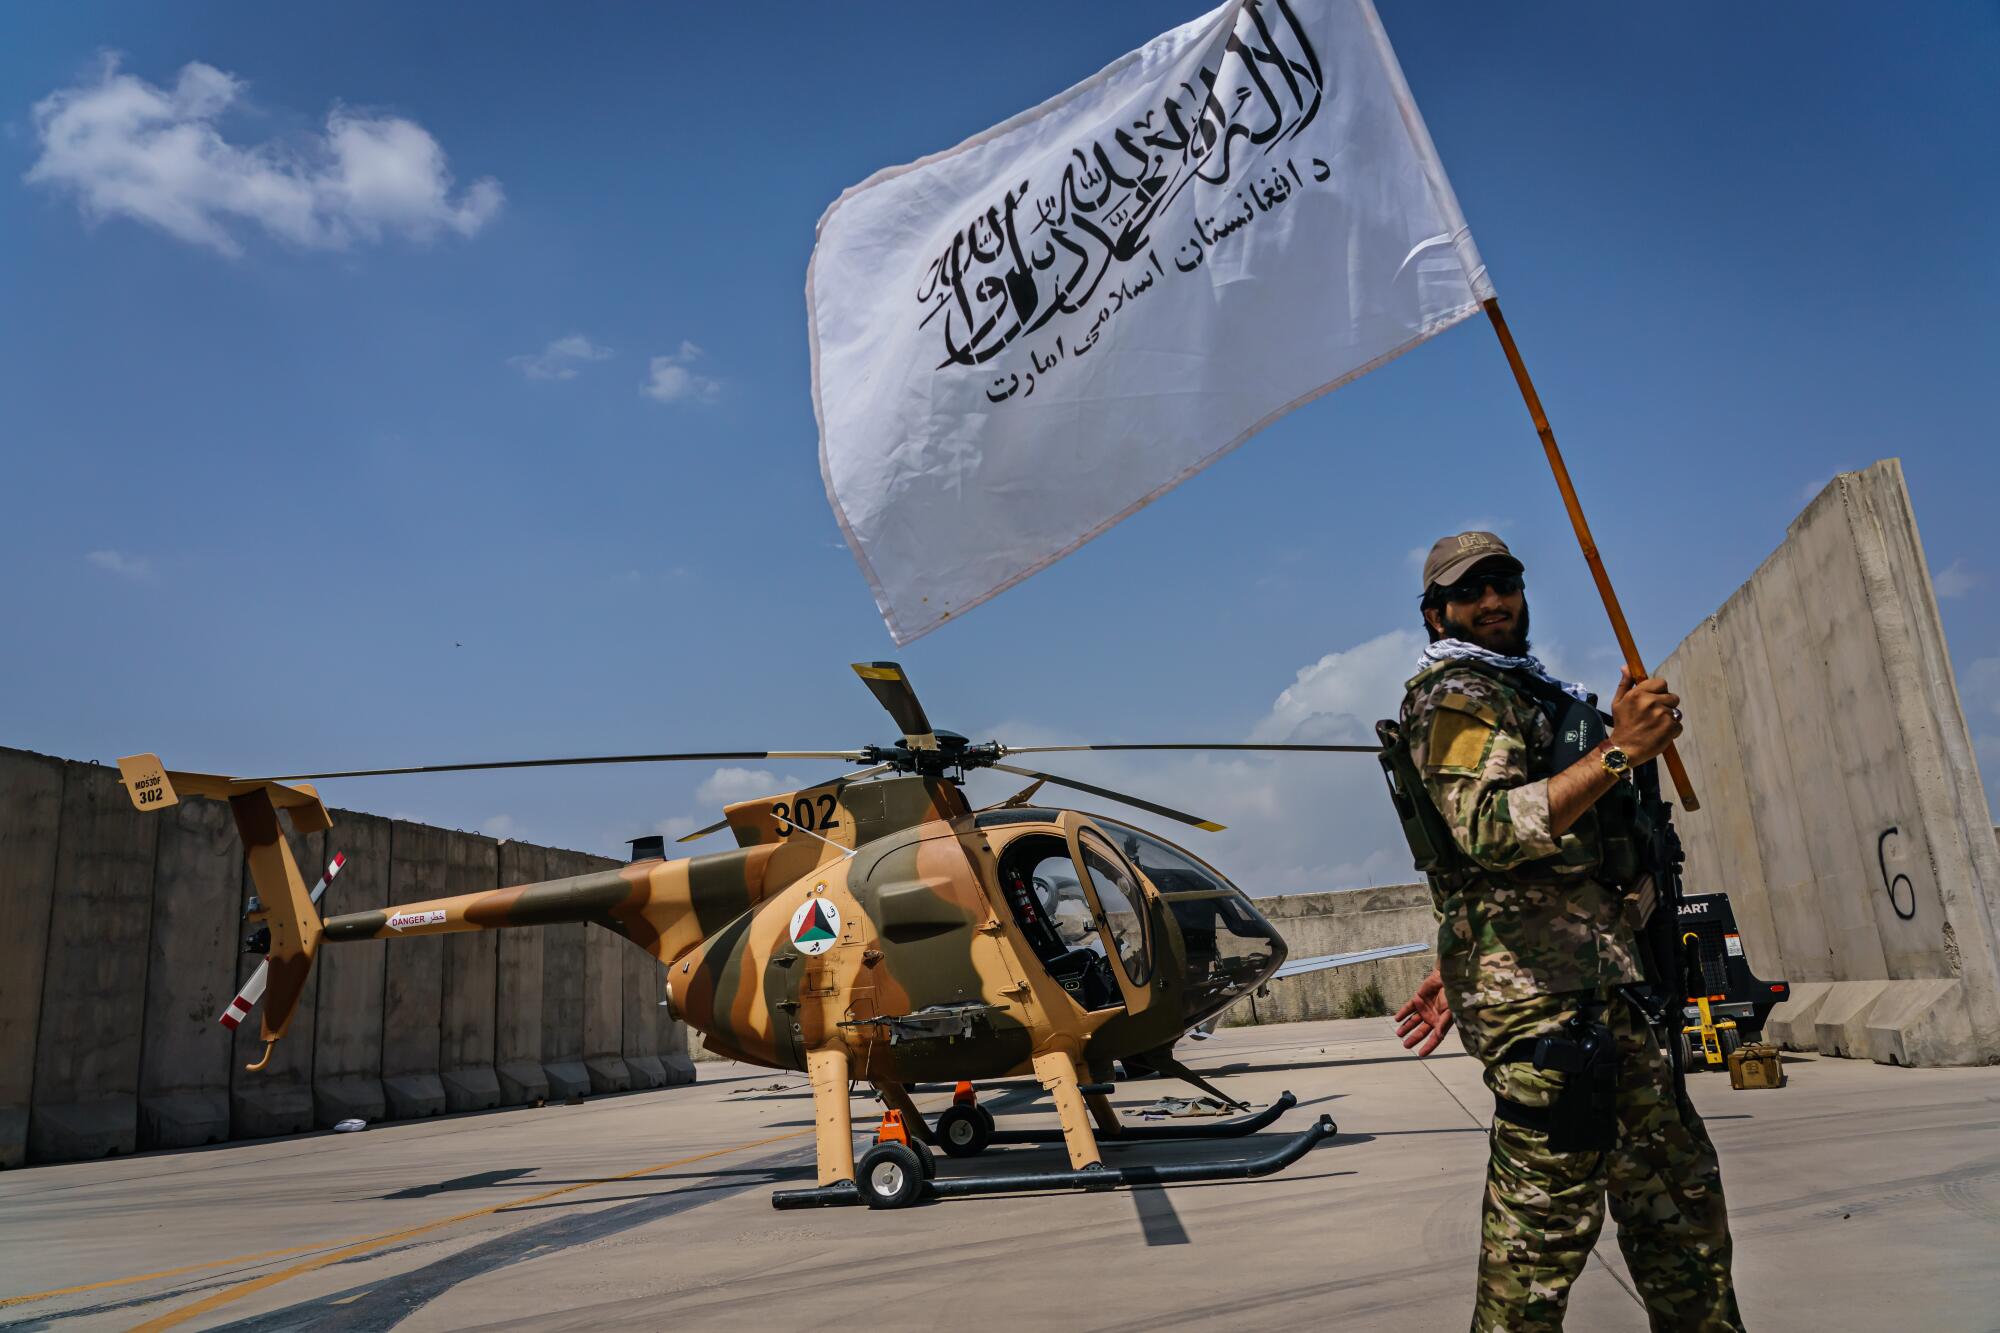 A Taliban fighter with white Taliban flag in front of a camouflage helicopter 